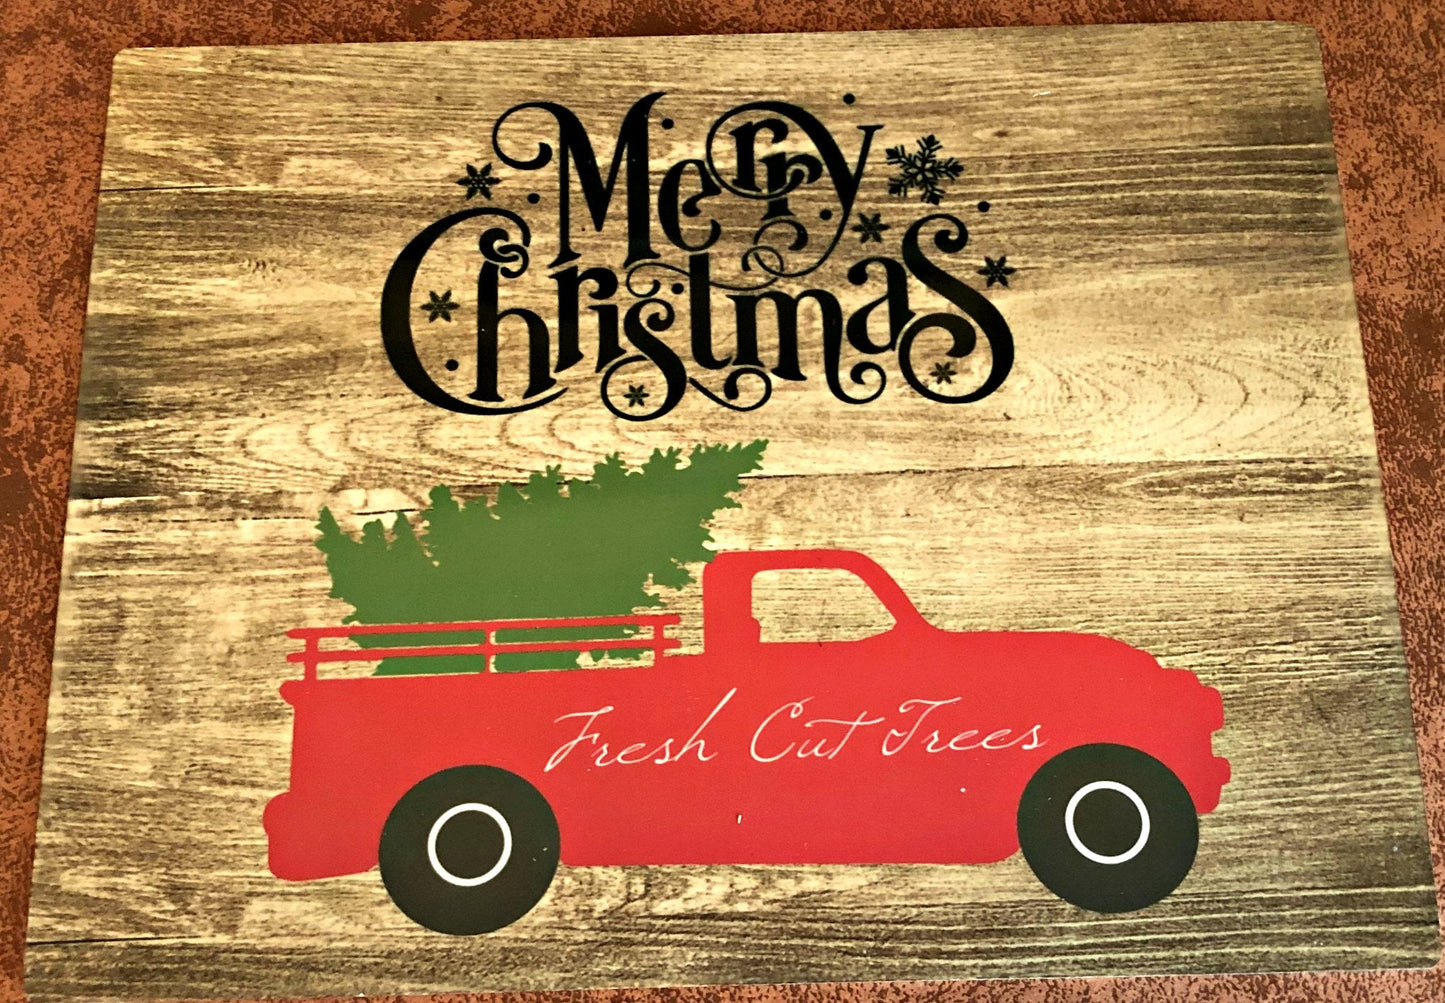 Merry Christmas Truck Sign- Fresh Cut Tree Wood Background